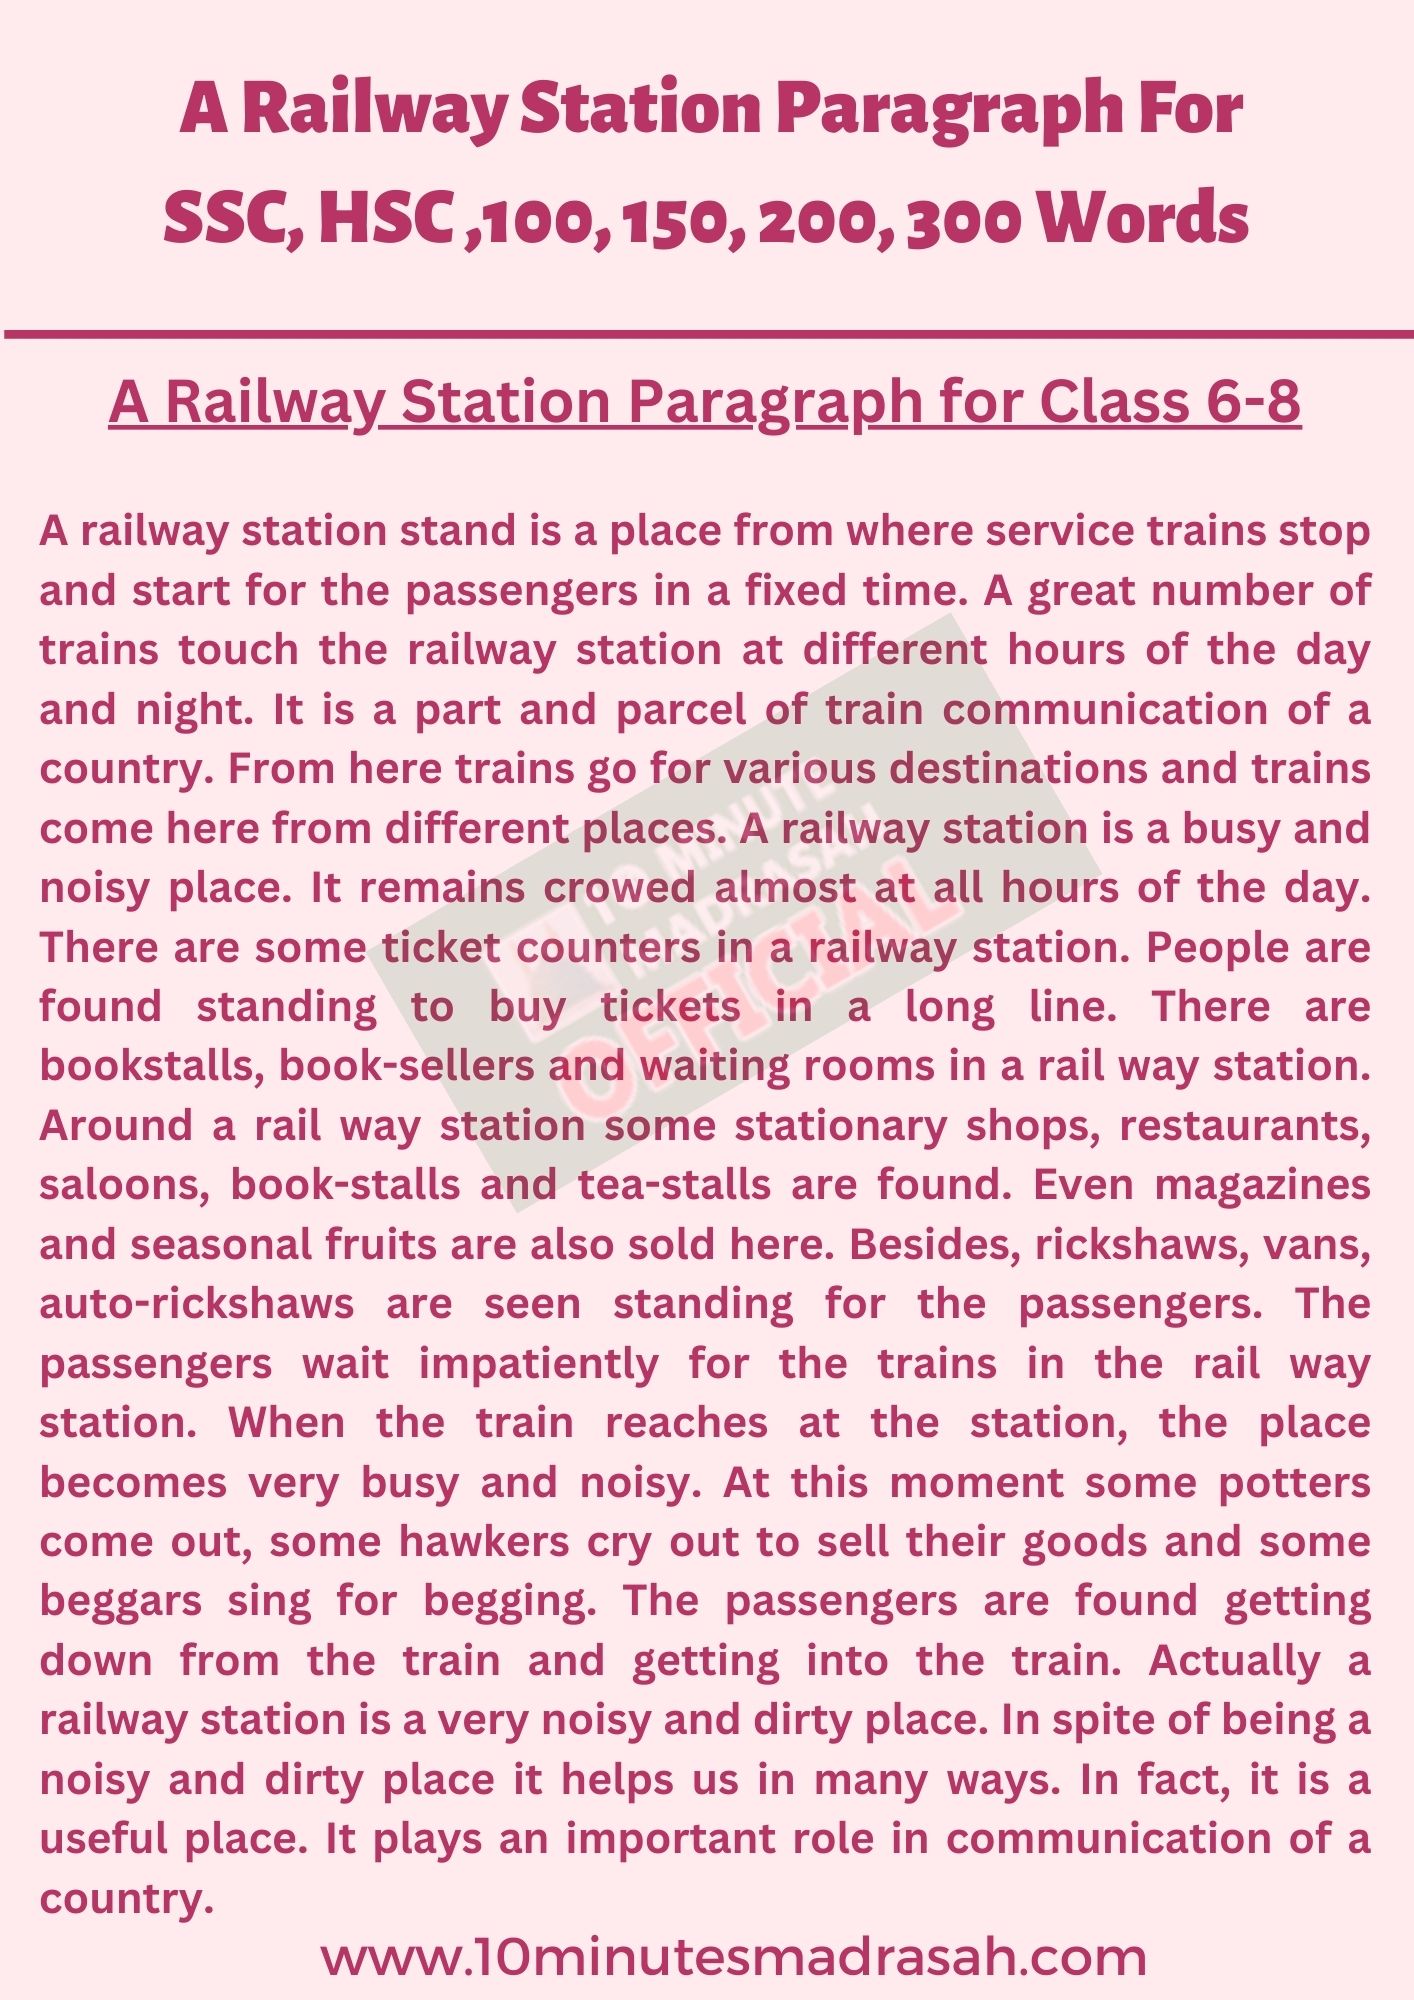 A Railway Station Paragraph for Class 6-8